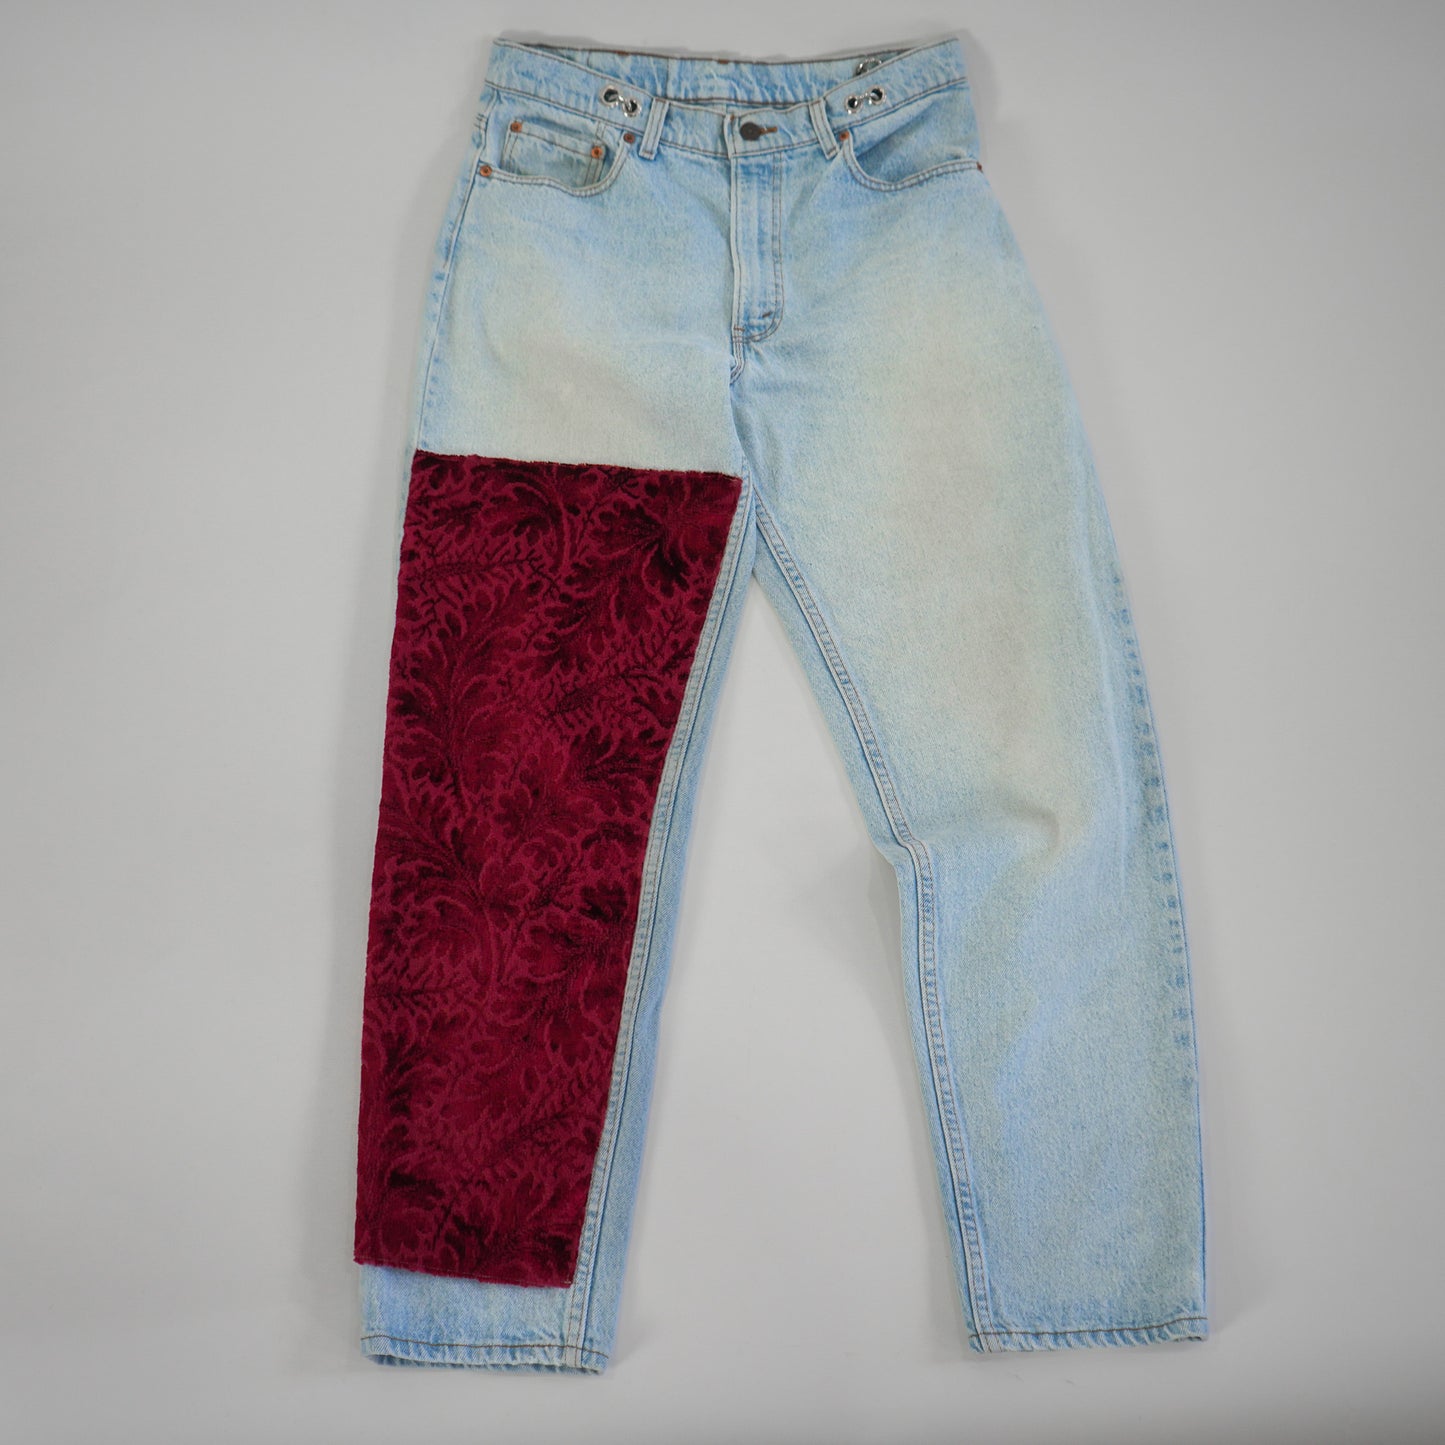 Tapestry Patchwork Jeans Light Wash (W 33)